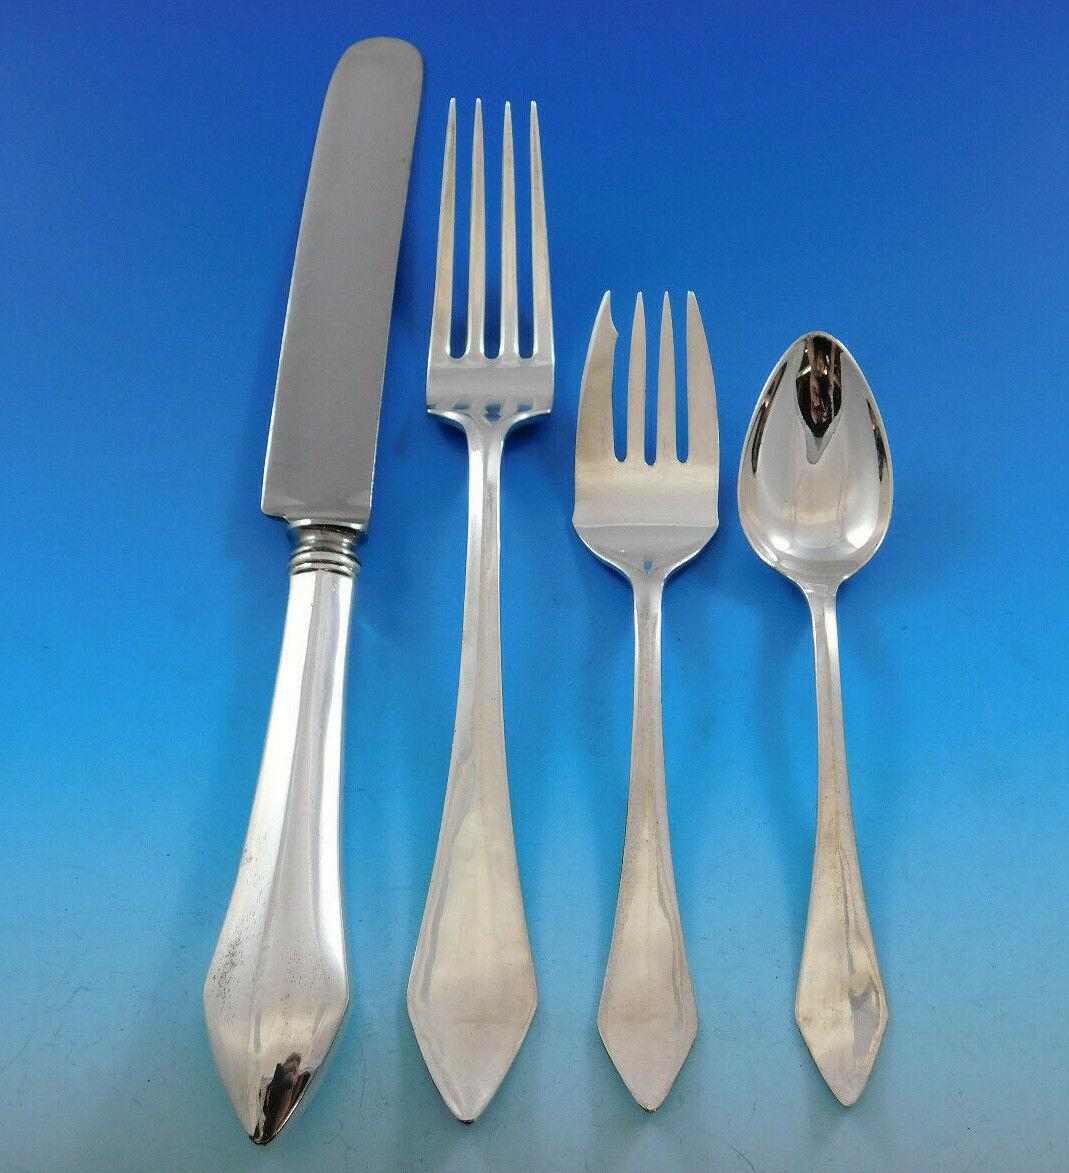 Gorgeous Dinner & Luncheon Chatham by Durgin, c1915, sterling silver flatware set - 109 pieces. This set includes:

8 dinner size knives, 9 5/8